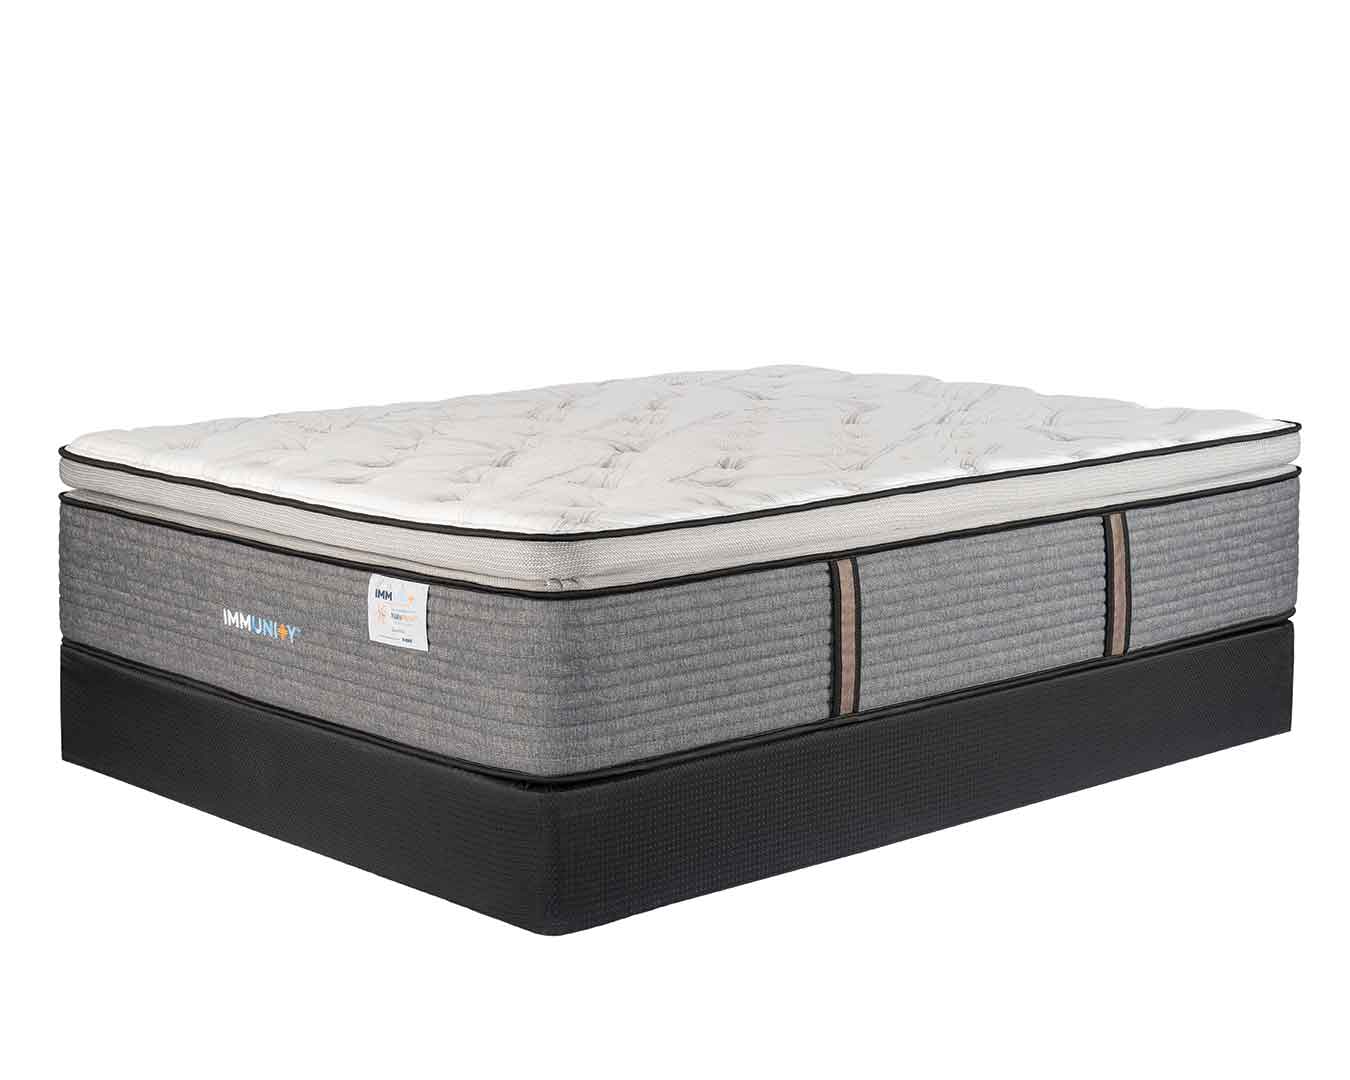 Immunity Sienna copper mattress on agility foundation at an angle with a white background.